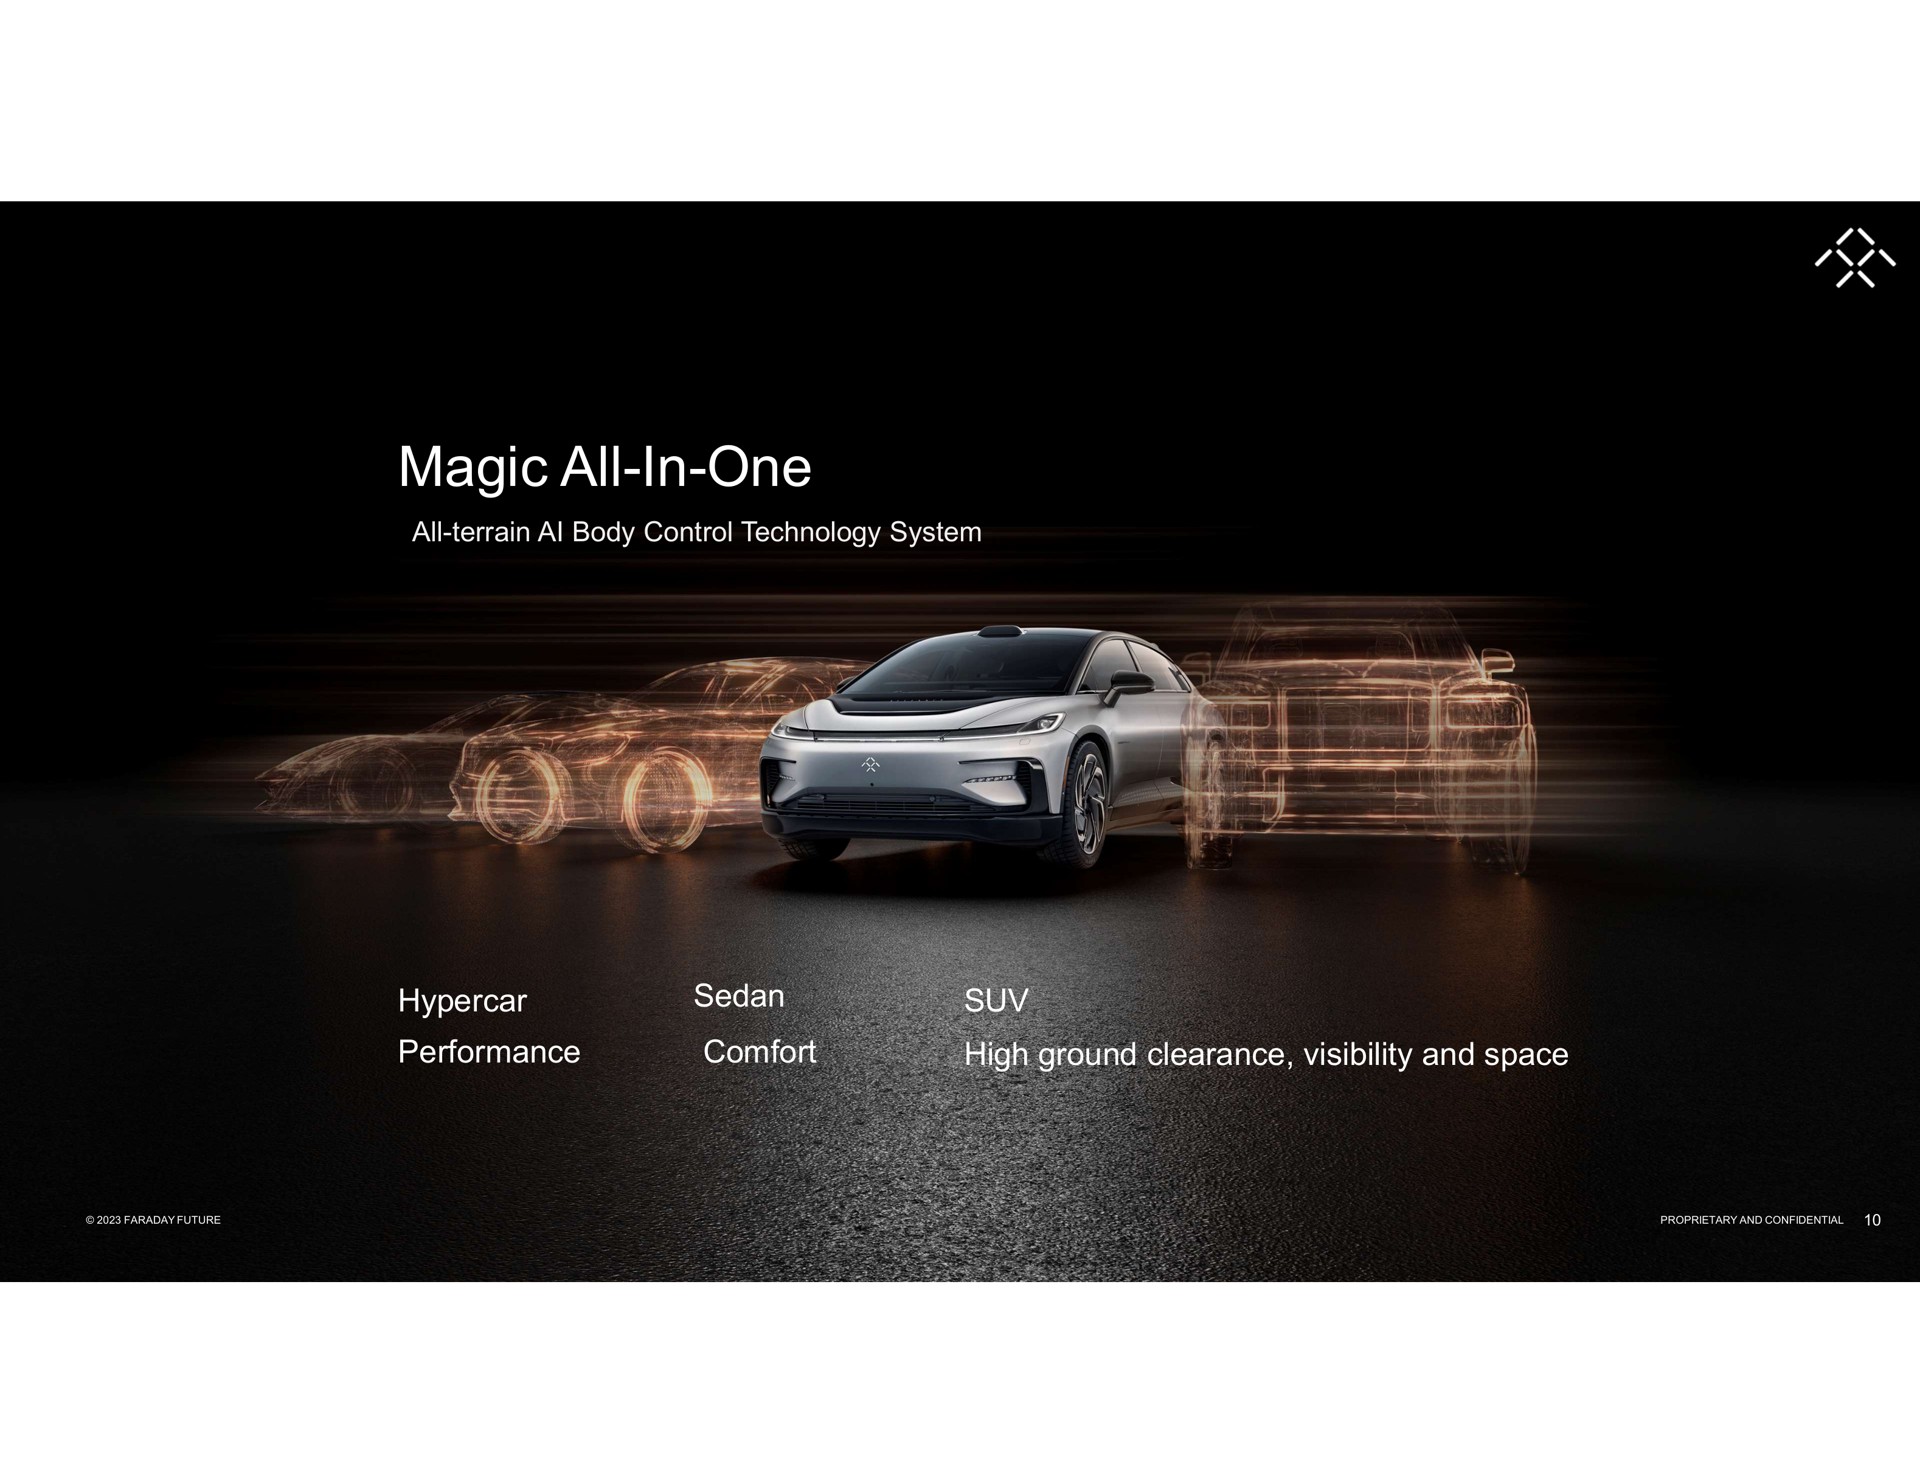 magic all in one all terrain body control technology system sedan performance comfort high ground clearance visibility and space | Faraday Future